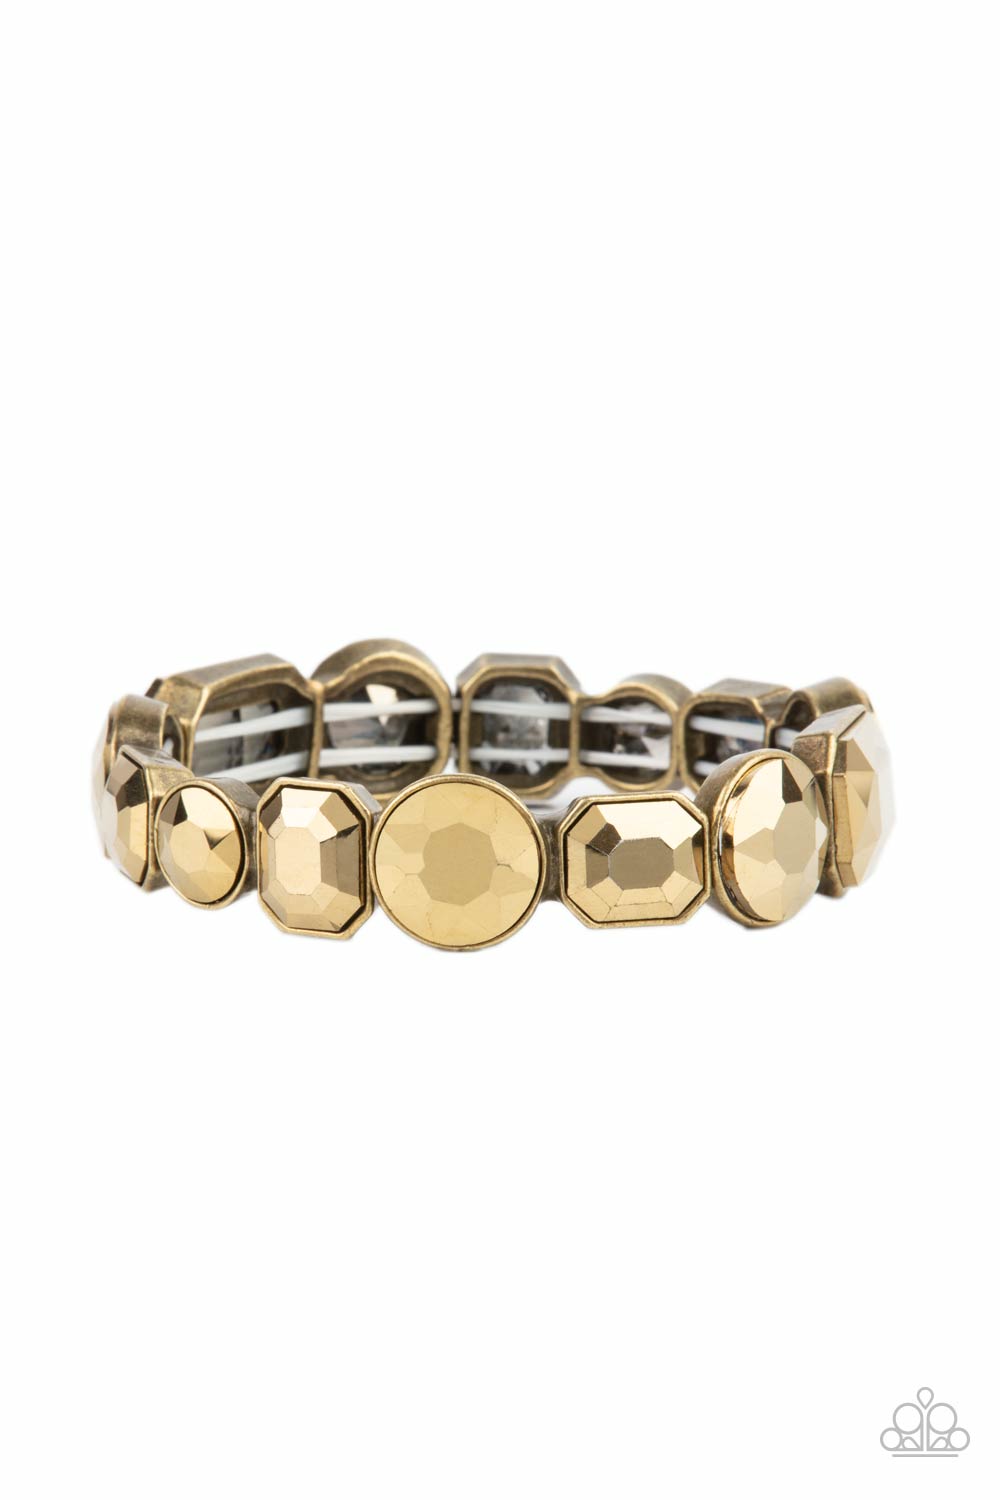 Extra Exposure Brass Bracelet - Paparazzi Accessories  Encased in sleek brass frames, a smoldering collection of round and emerald cut aurum rhinestones glide along stretchy bands around the wrist, creating a sparkly industrial statement piece.  All Paparazzi Accessories are lead free and nickel free!   Sold as one individual bracelet.